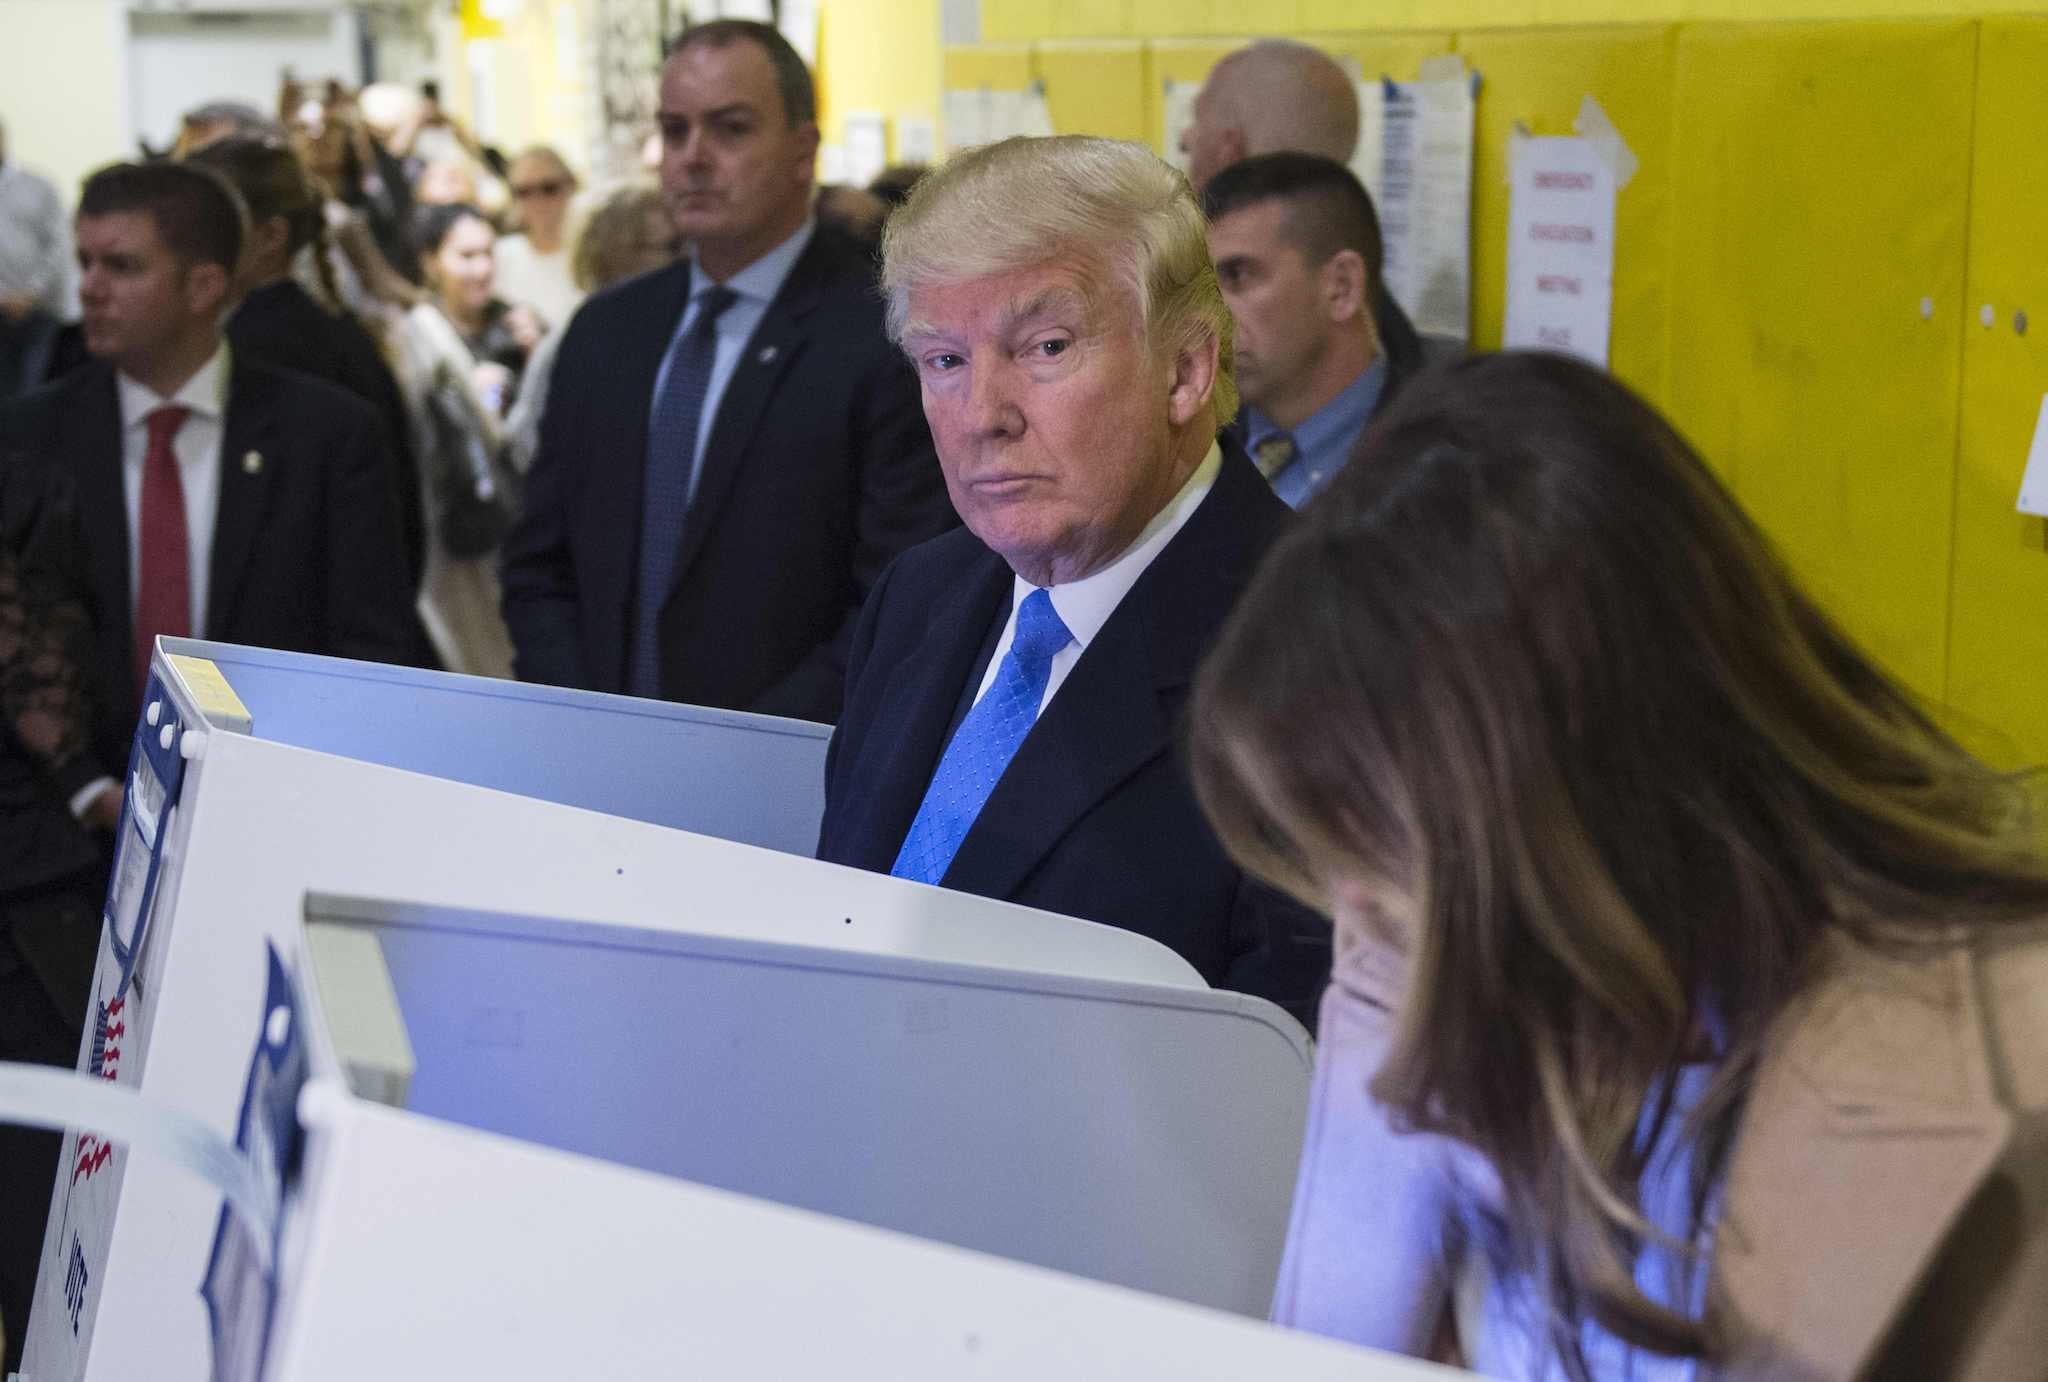 Republican presidential nominee Donald Trump(2nd R) and his wife Melania fill out their ballots at a polling station in a school during the 2016 presidential elections on November 8, 2016 in New York